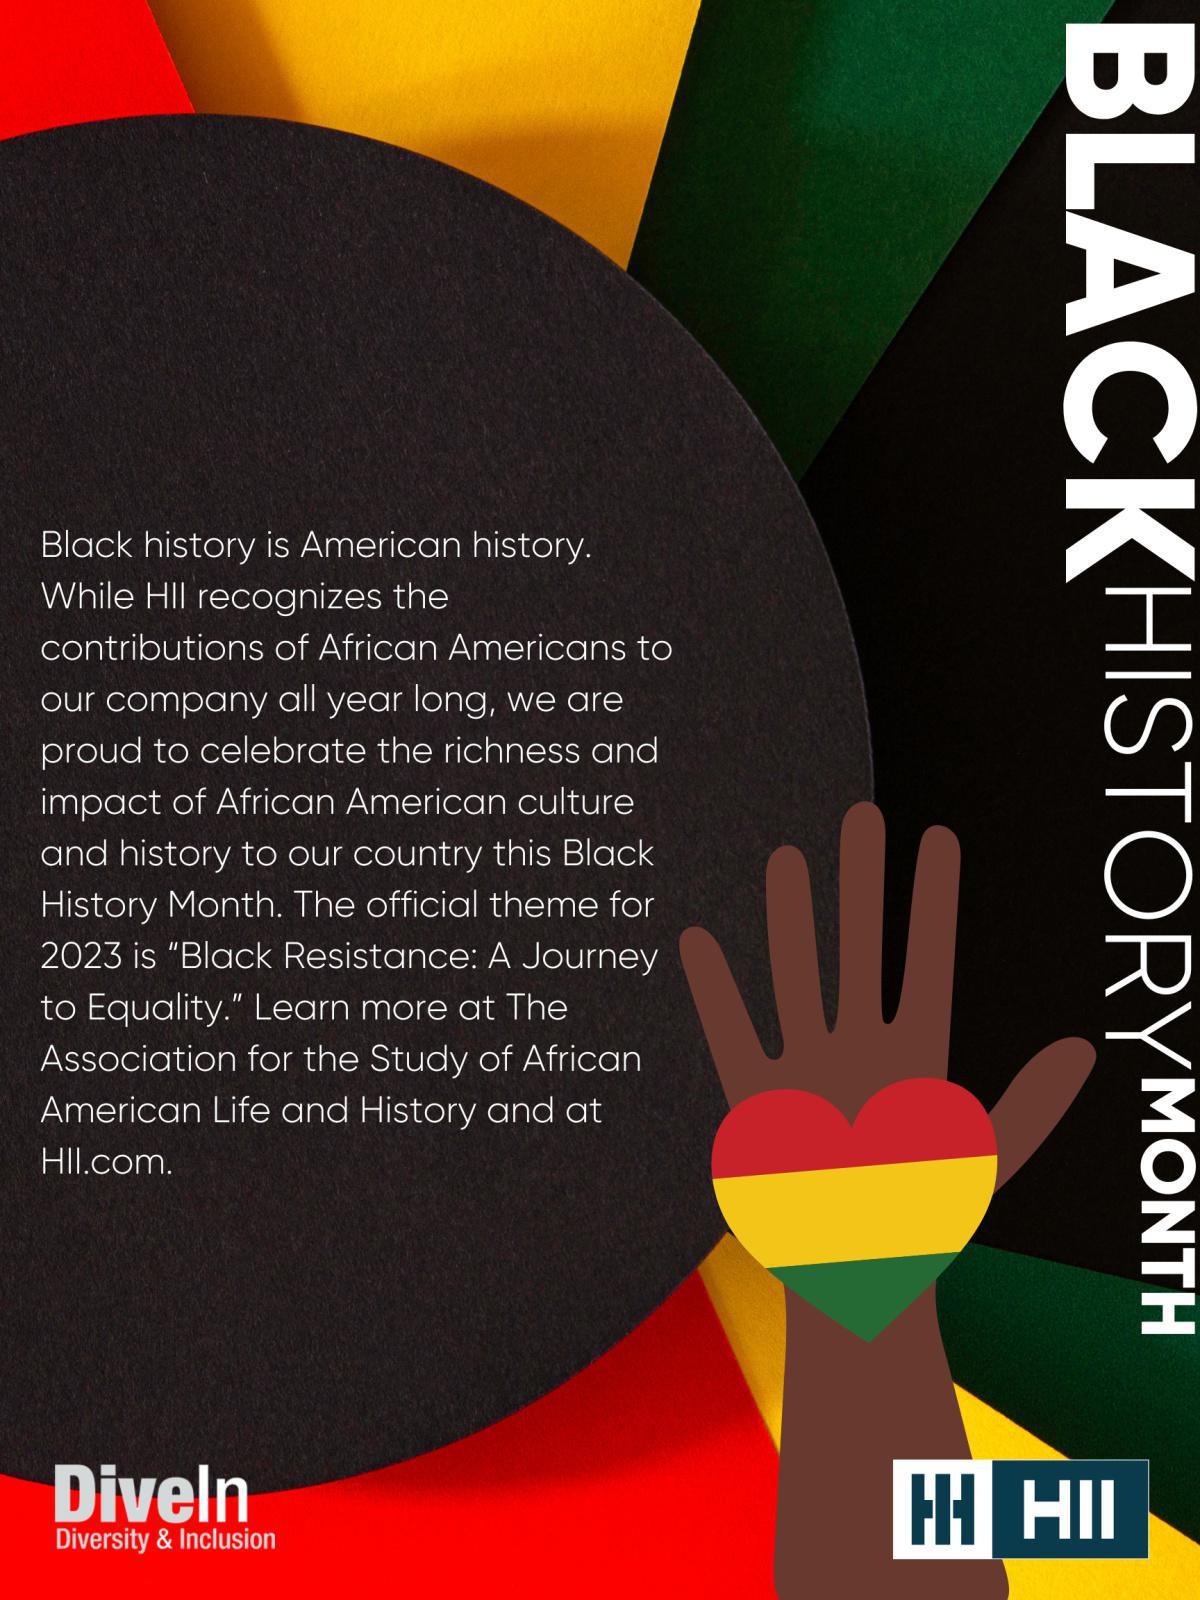 Black History Month | Action, empowerment and community engagement